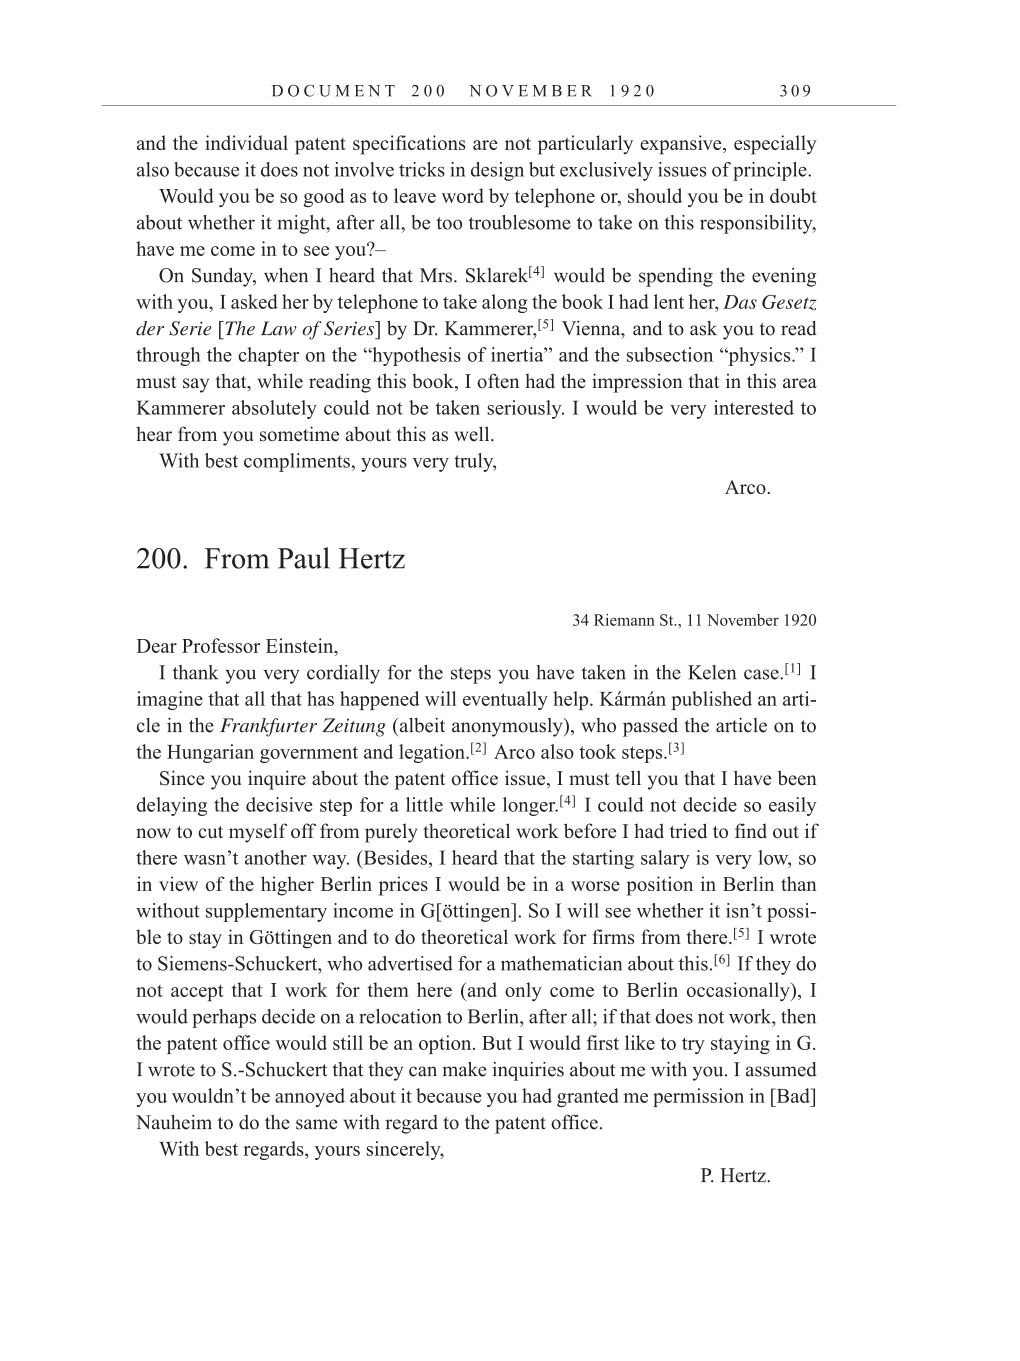 Volume 10: The Berlin Years: Correspondence, May-December 1920, and Supplementary Correspondence, 1909-1920 (English translation supplement) page 309